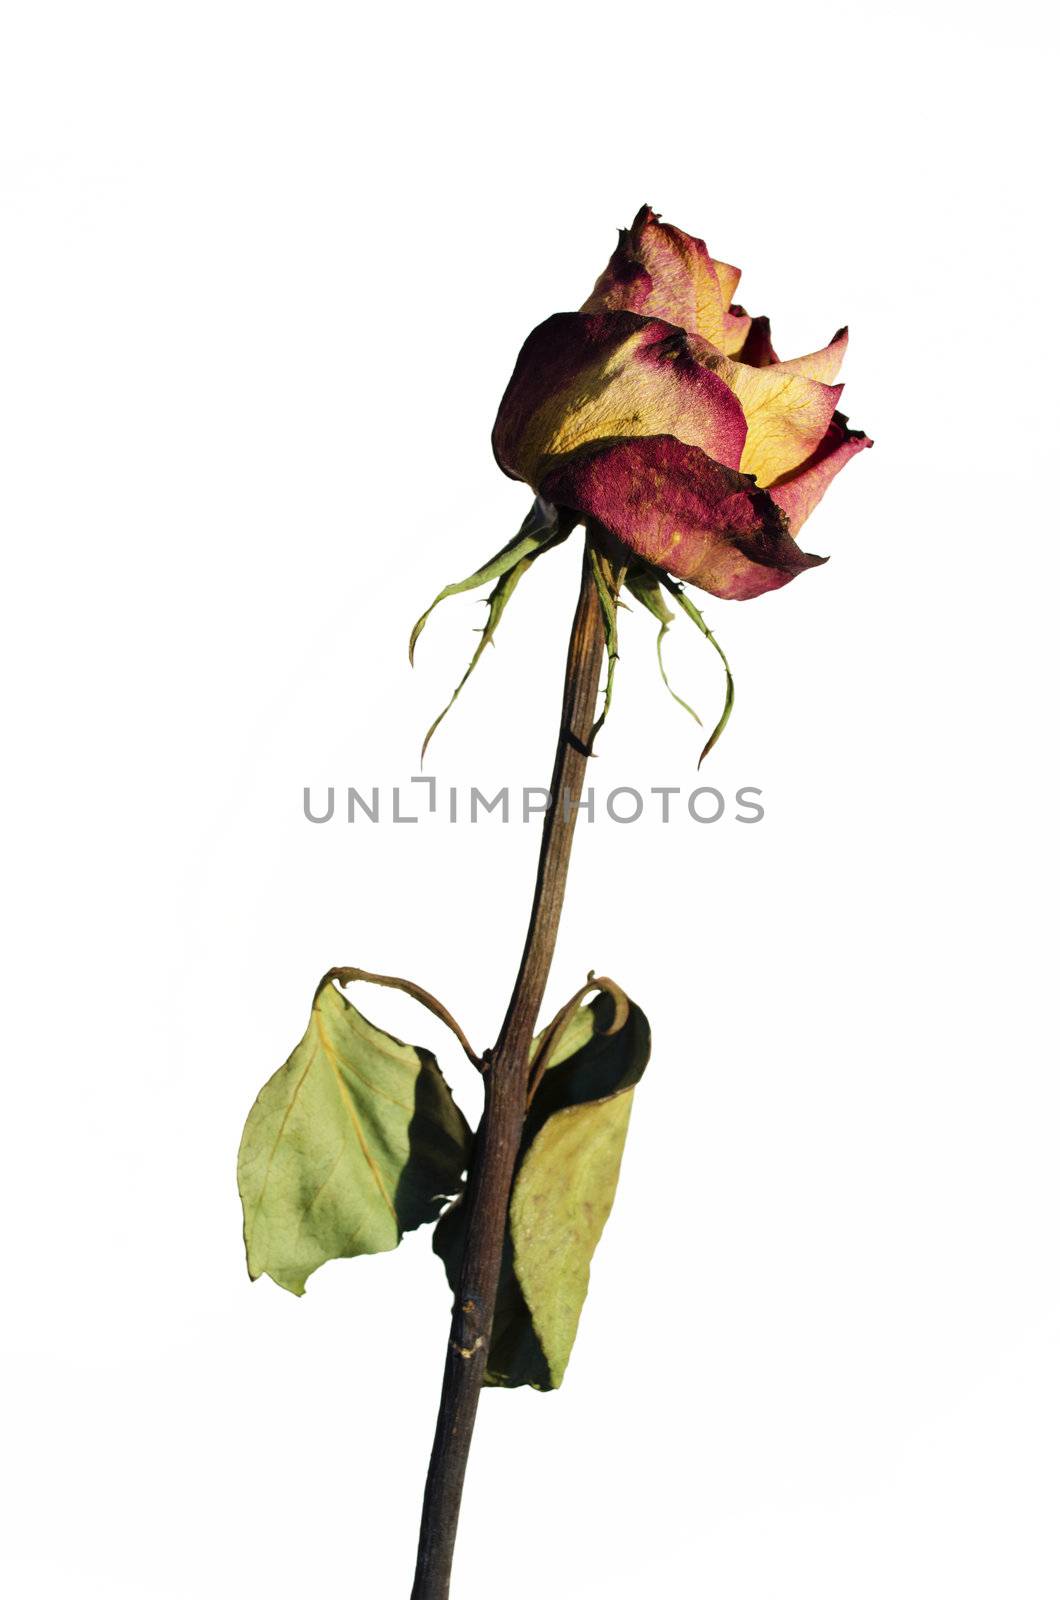 Withered rose on a white background with vignetting.